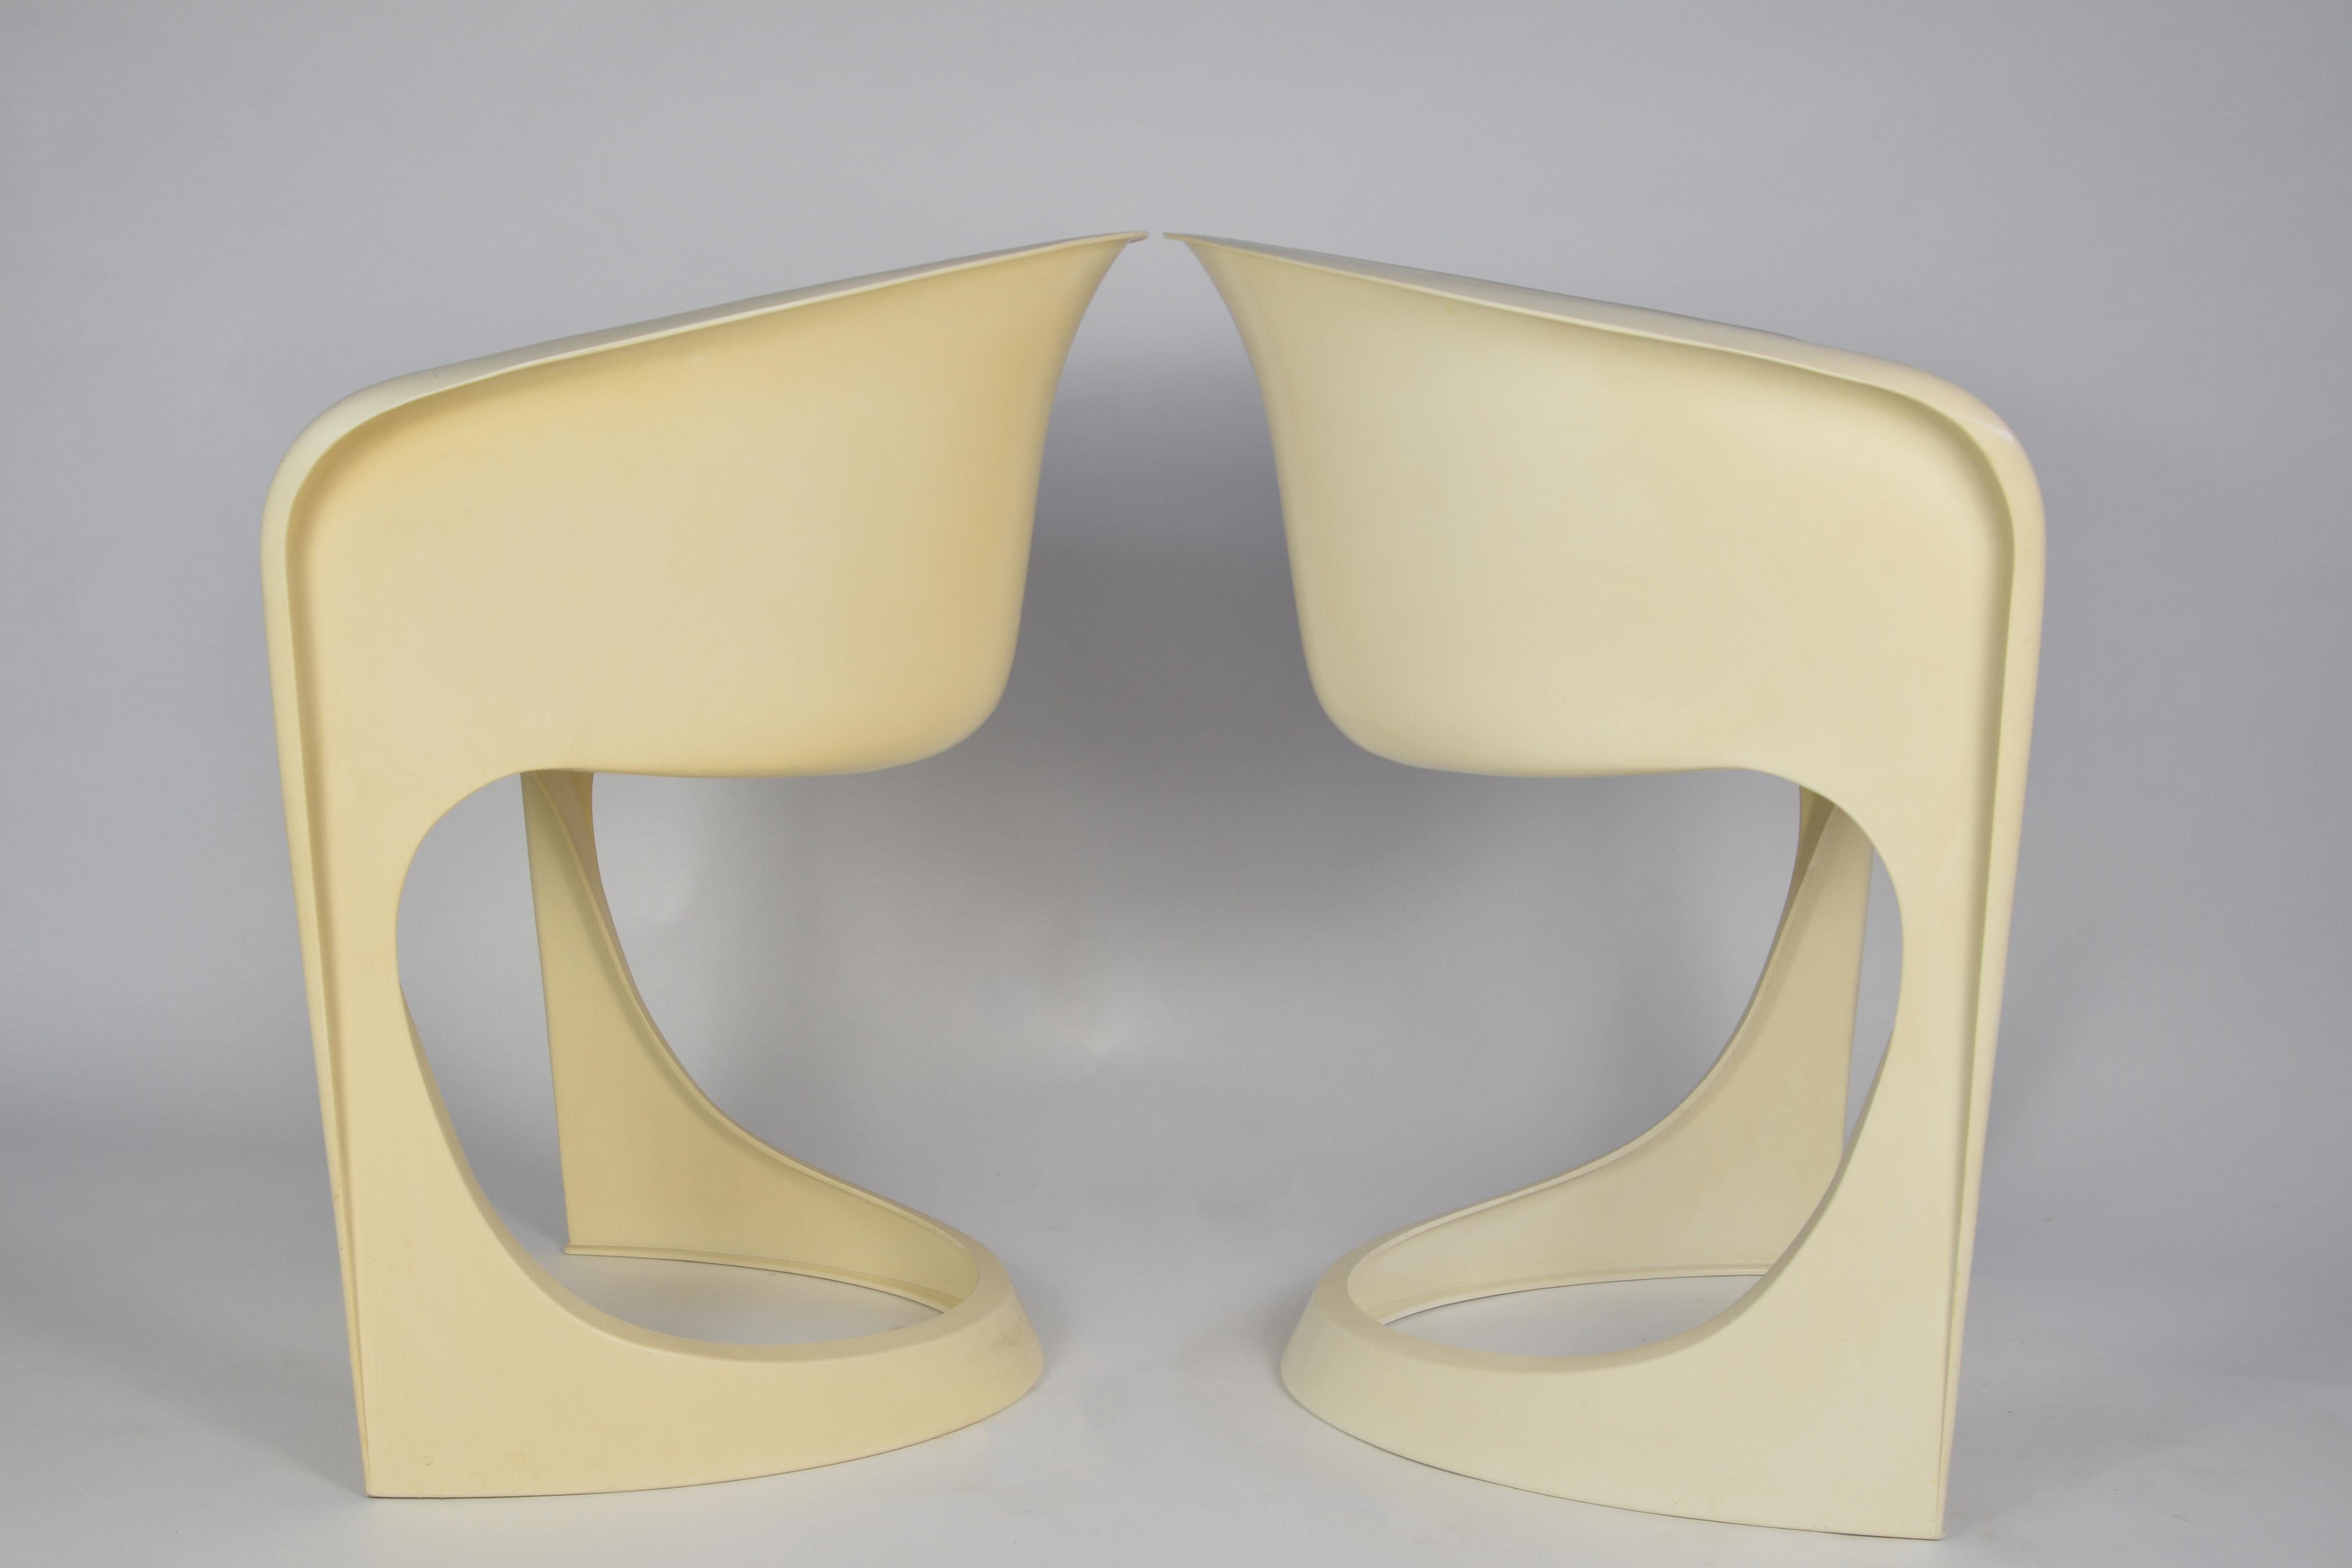 Pair of white plastic chairs, designed by Steen Ostergaard from Cado in the 1970s.

Steen Ostergaard, Furniture designer, Inventor and Architect born in Denmark 1935, Nominated 